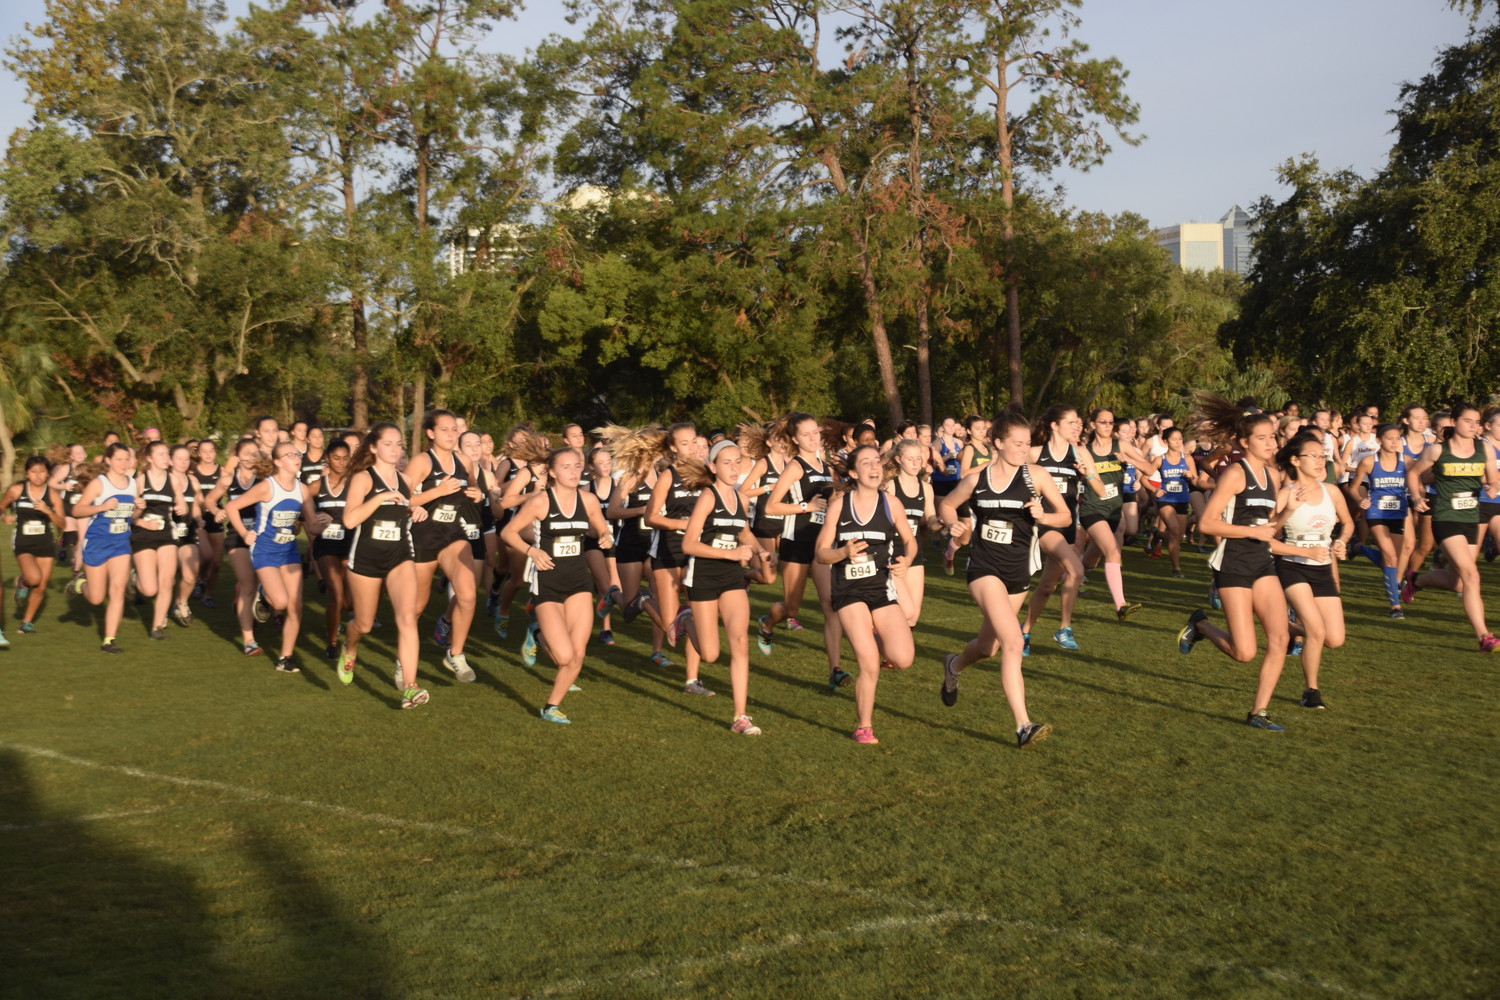 The JV girls kick of their race Oct. 21.